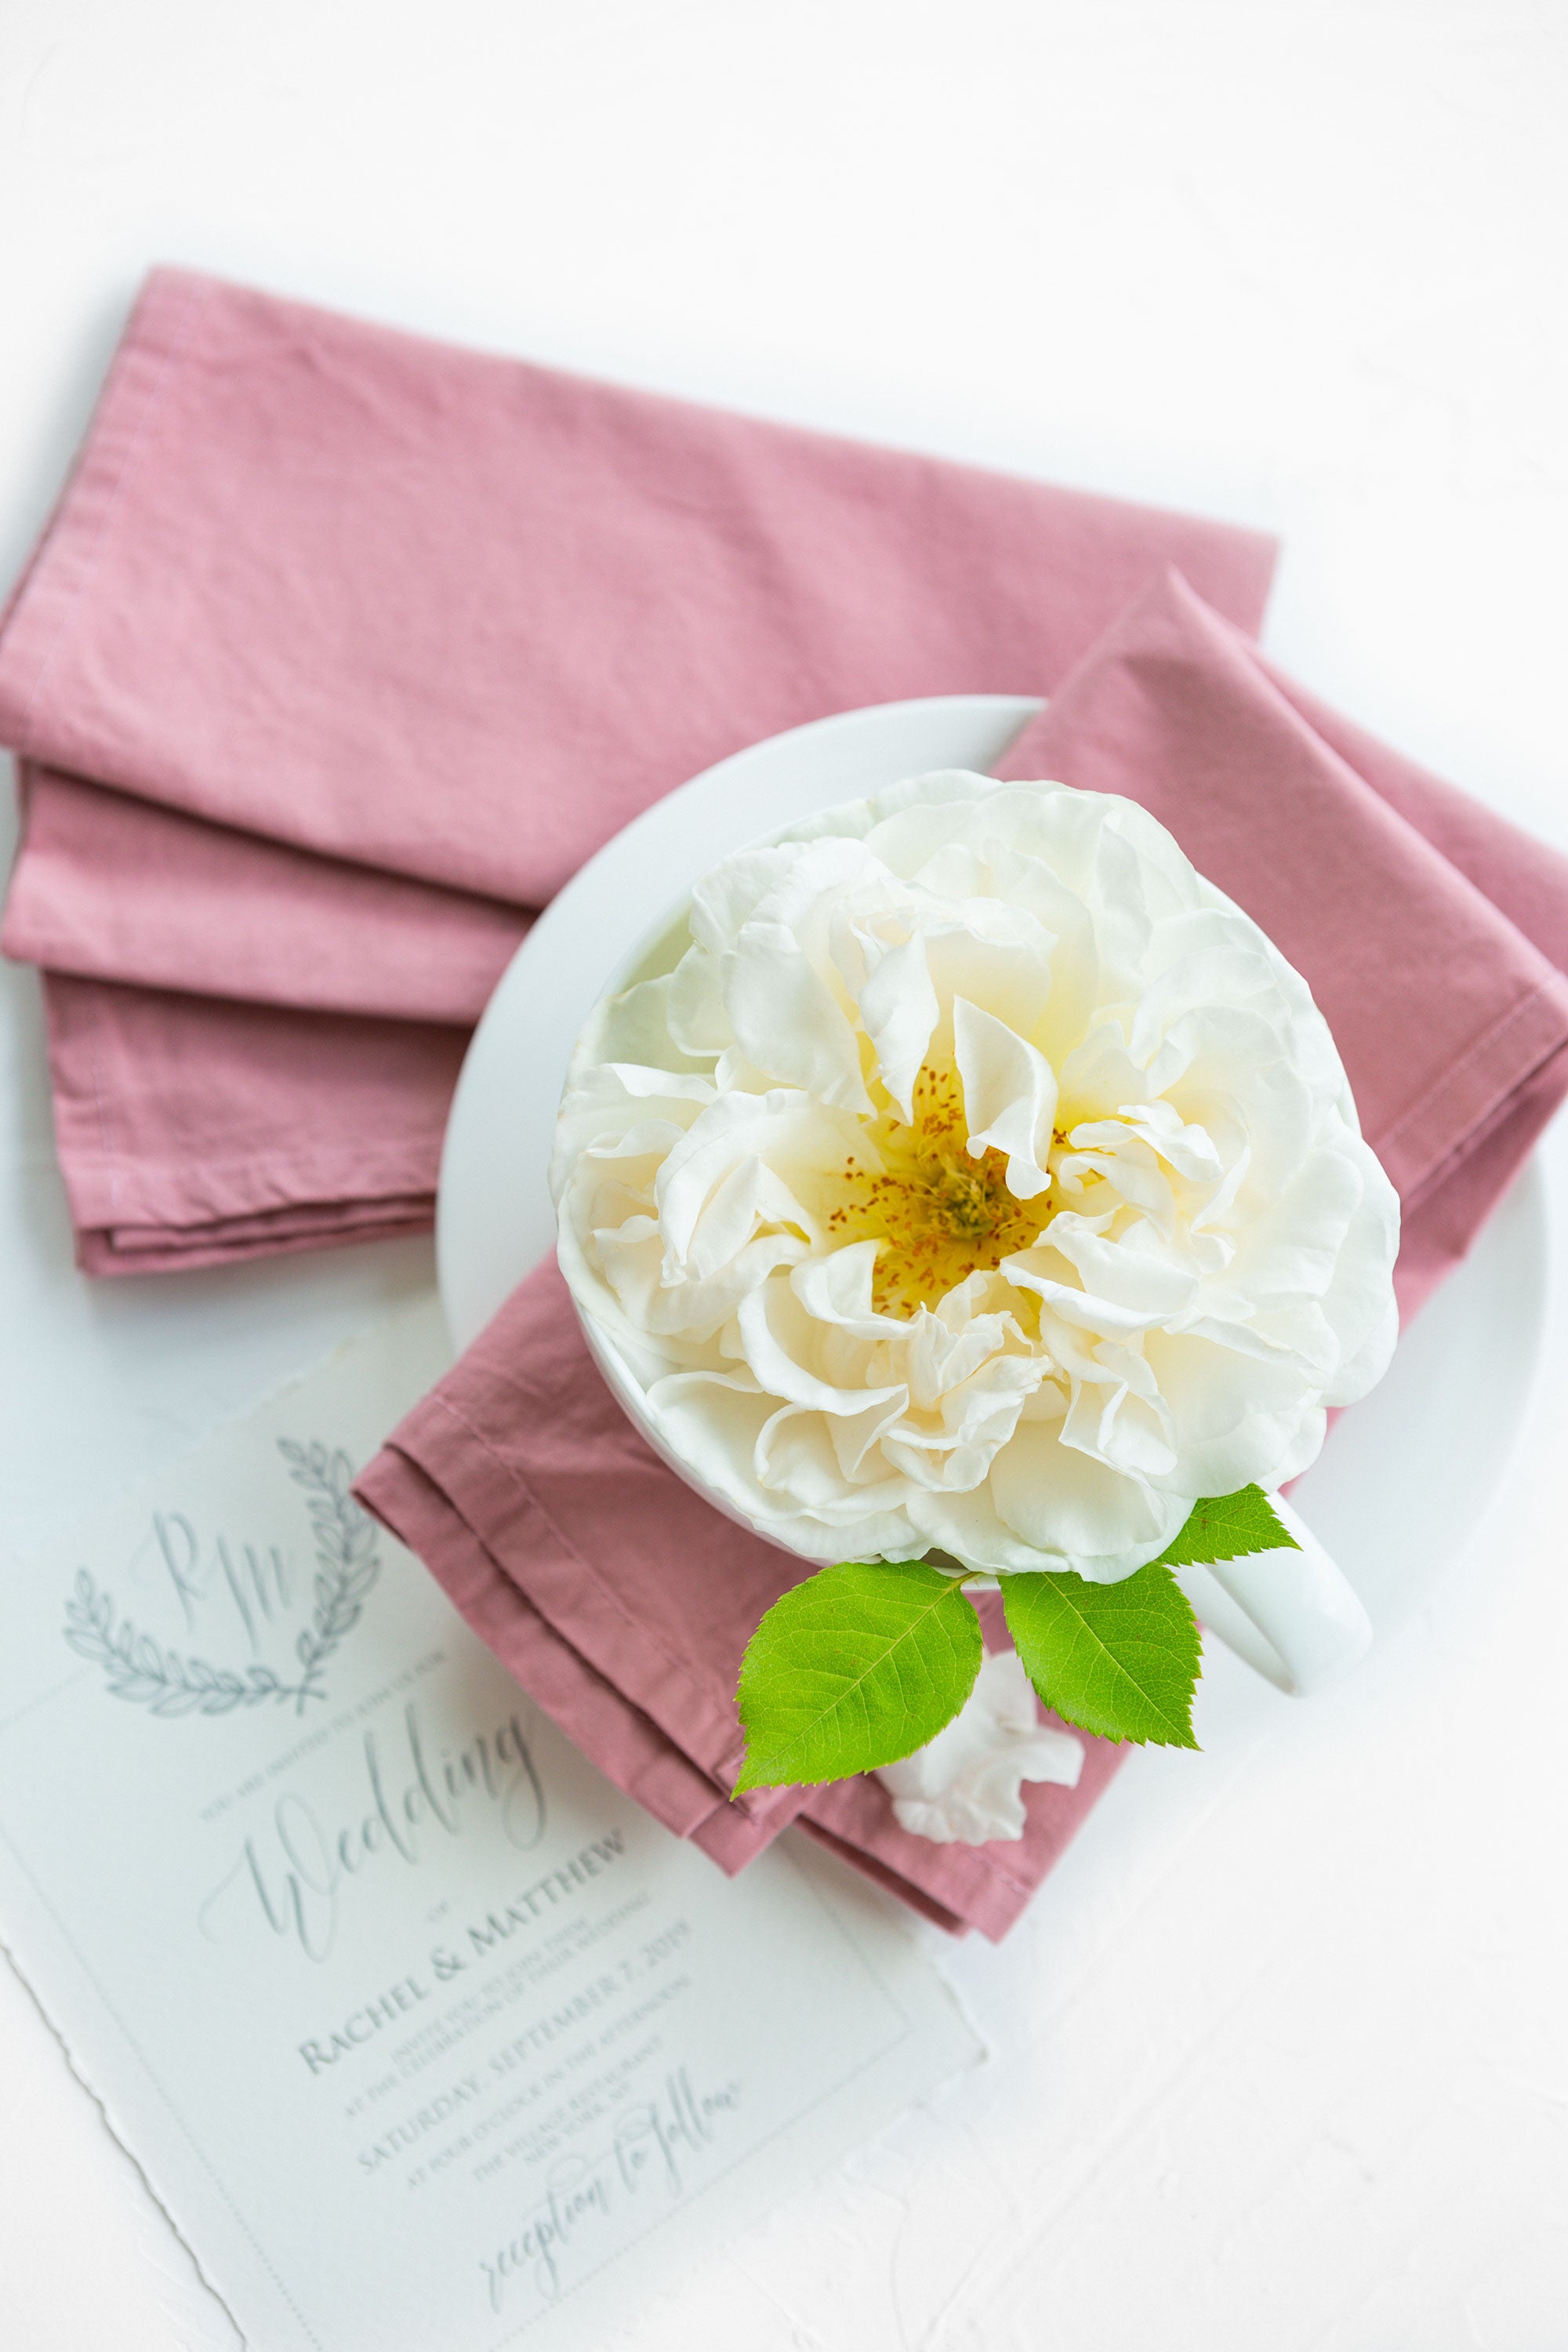 Dusty rose napkins set for wedding table with white rose